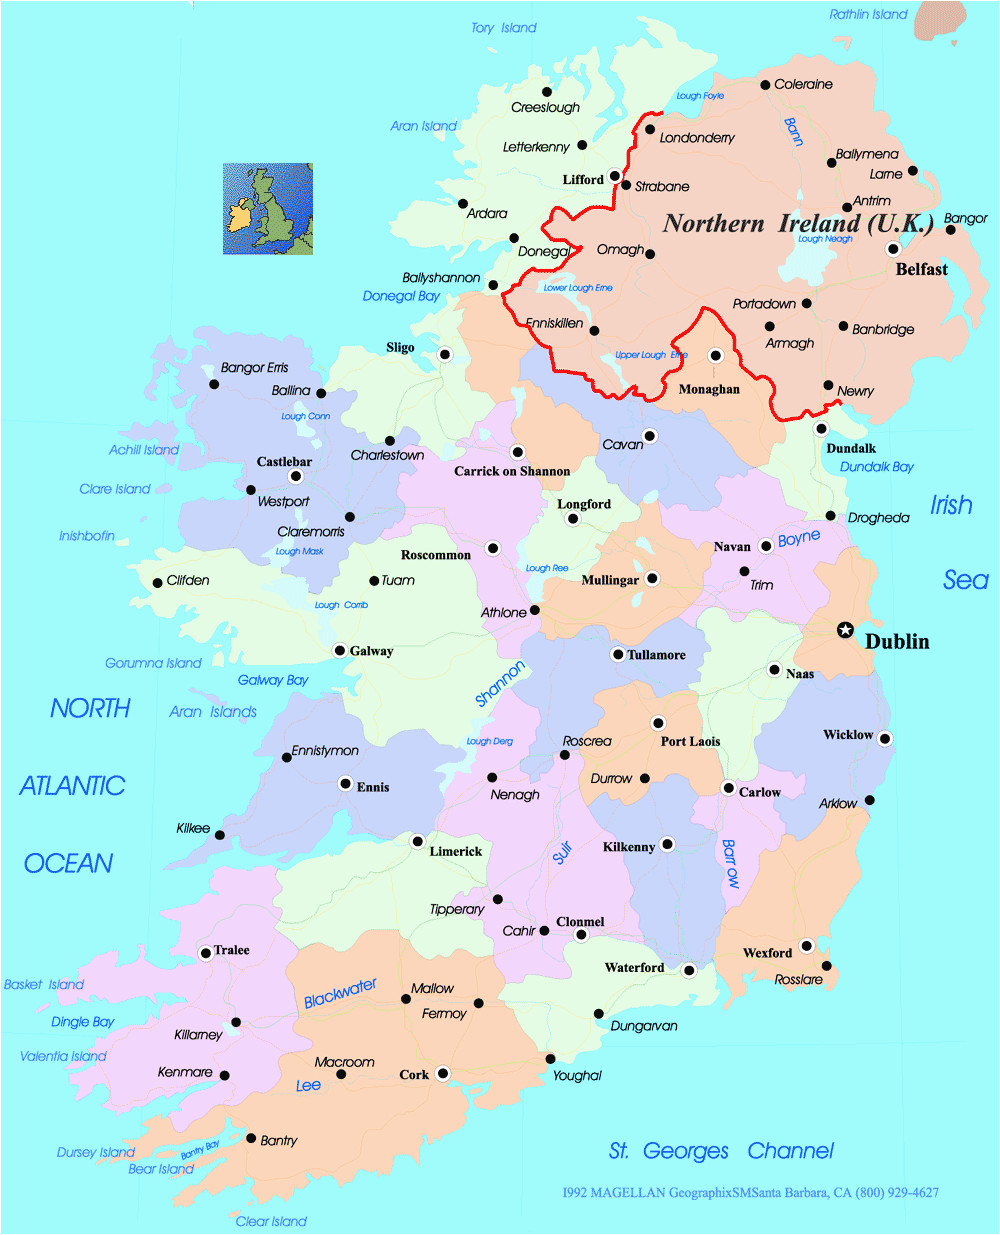 Maps Of Ireland Counties and towns Ireland Map with Counties and towns Google Search Ireland